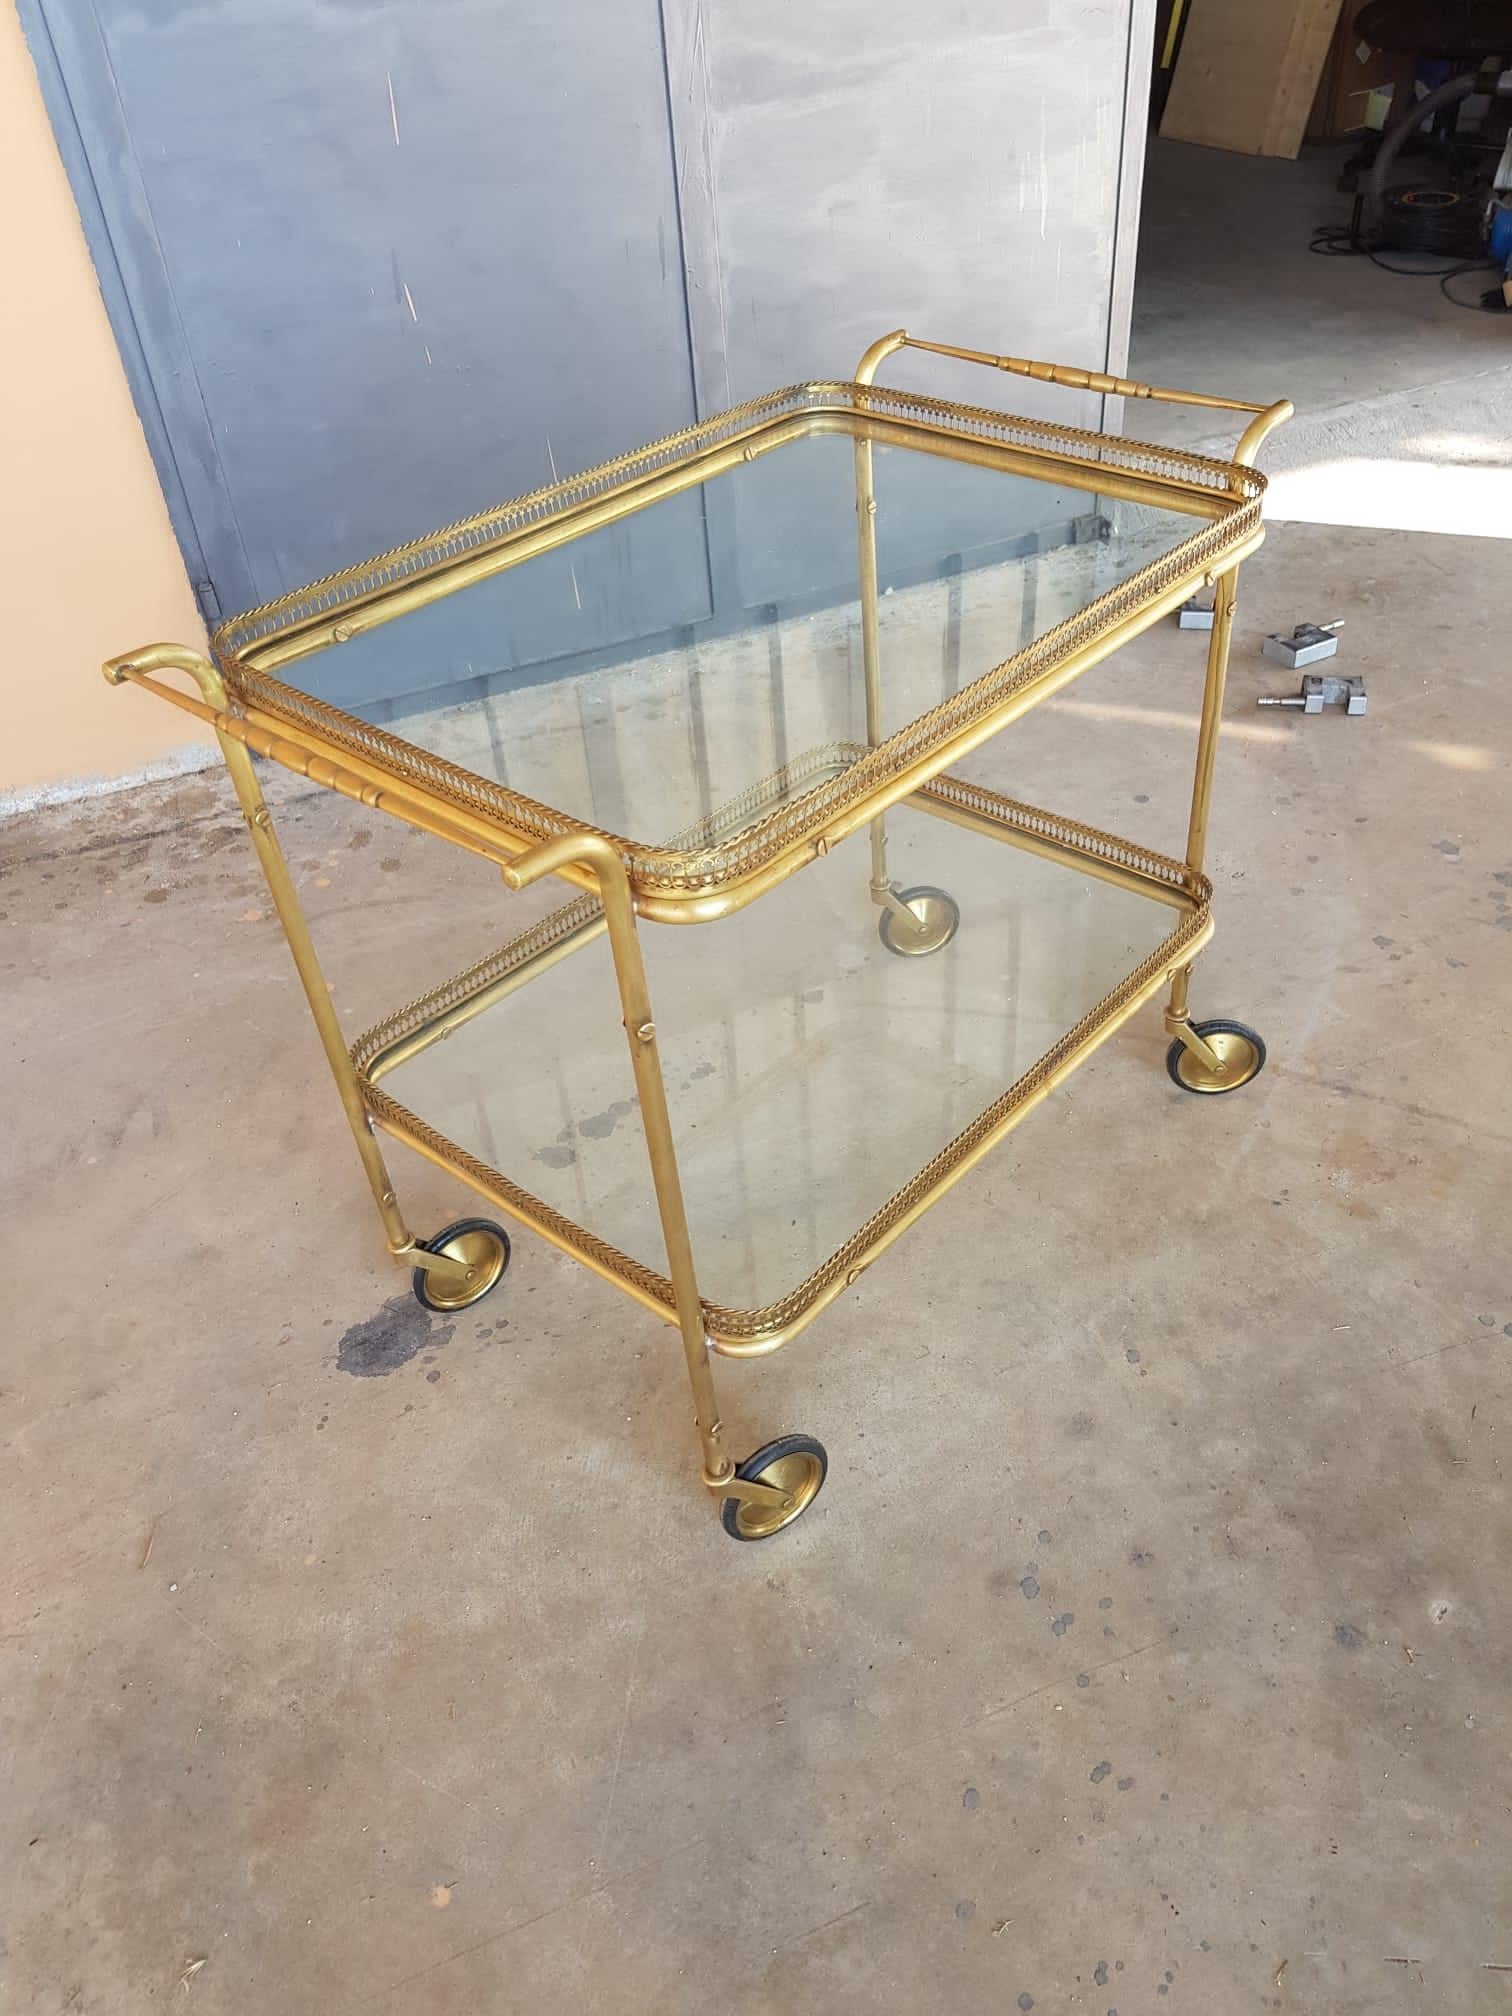 1940s brass and two glass shelves wheeled tray .
Perfect to be used as side table, dry bar or serving table in the kitchen or bathroom.
Restored in conservative way ( brass cleaned ) .
Size: 83 x 49 x h 70 cm 
A video of the item Is available